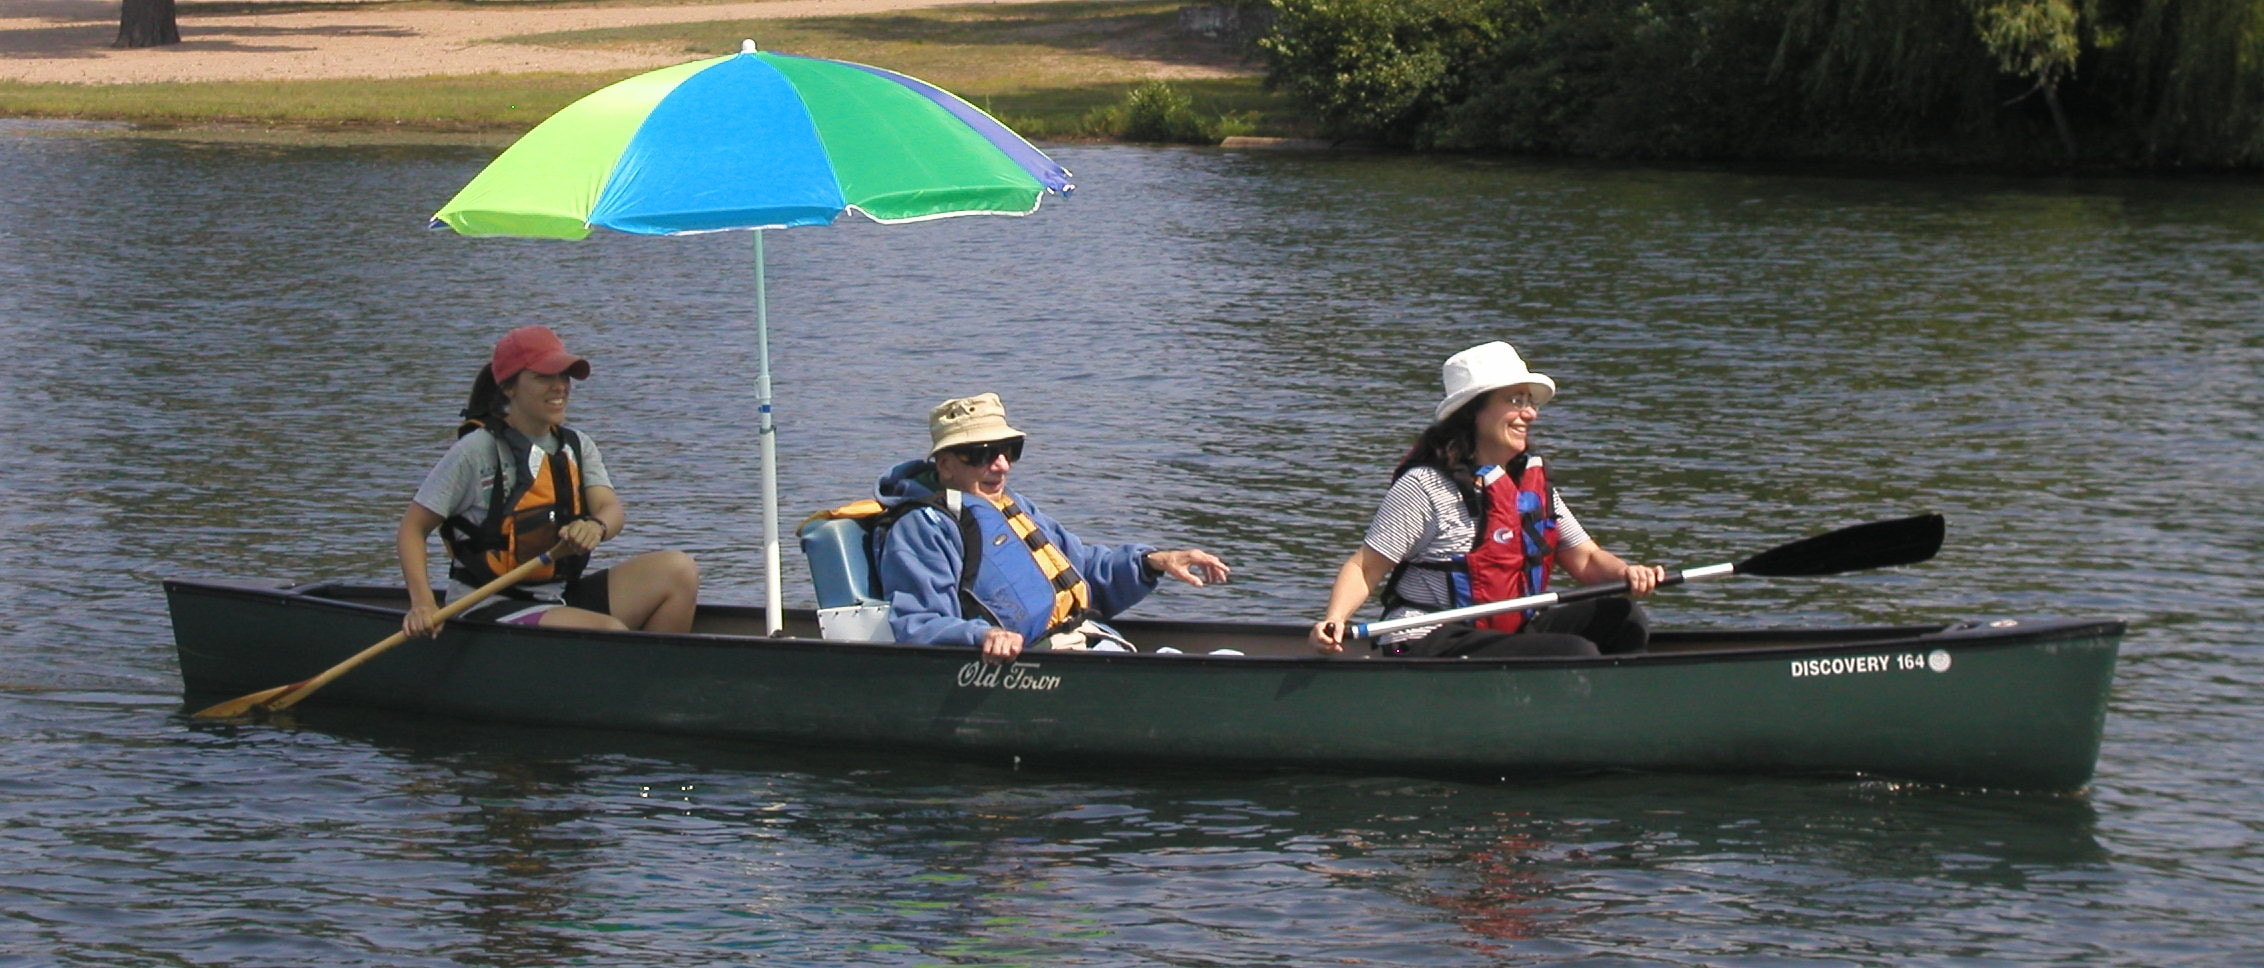 Three paddlers in a canoe. The center paddler is sitting in a padded seat with side support that is placed in the bottom of the canoe.